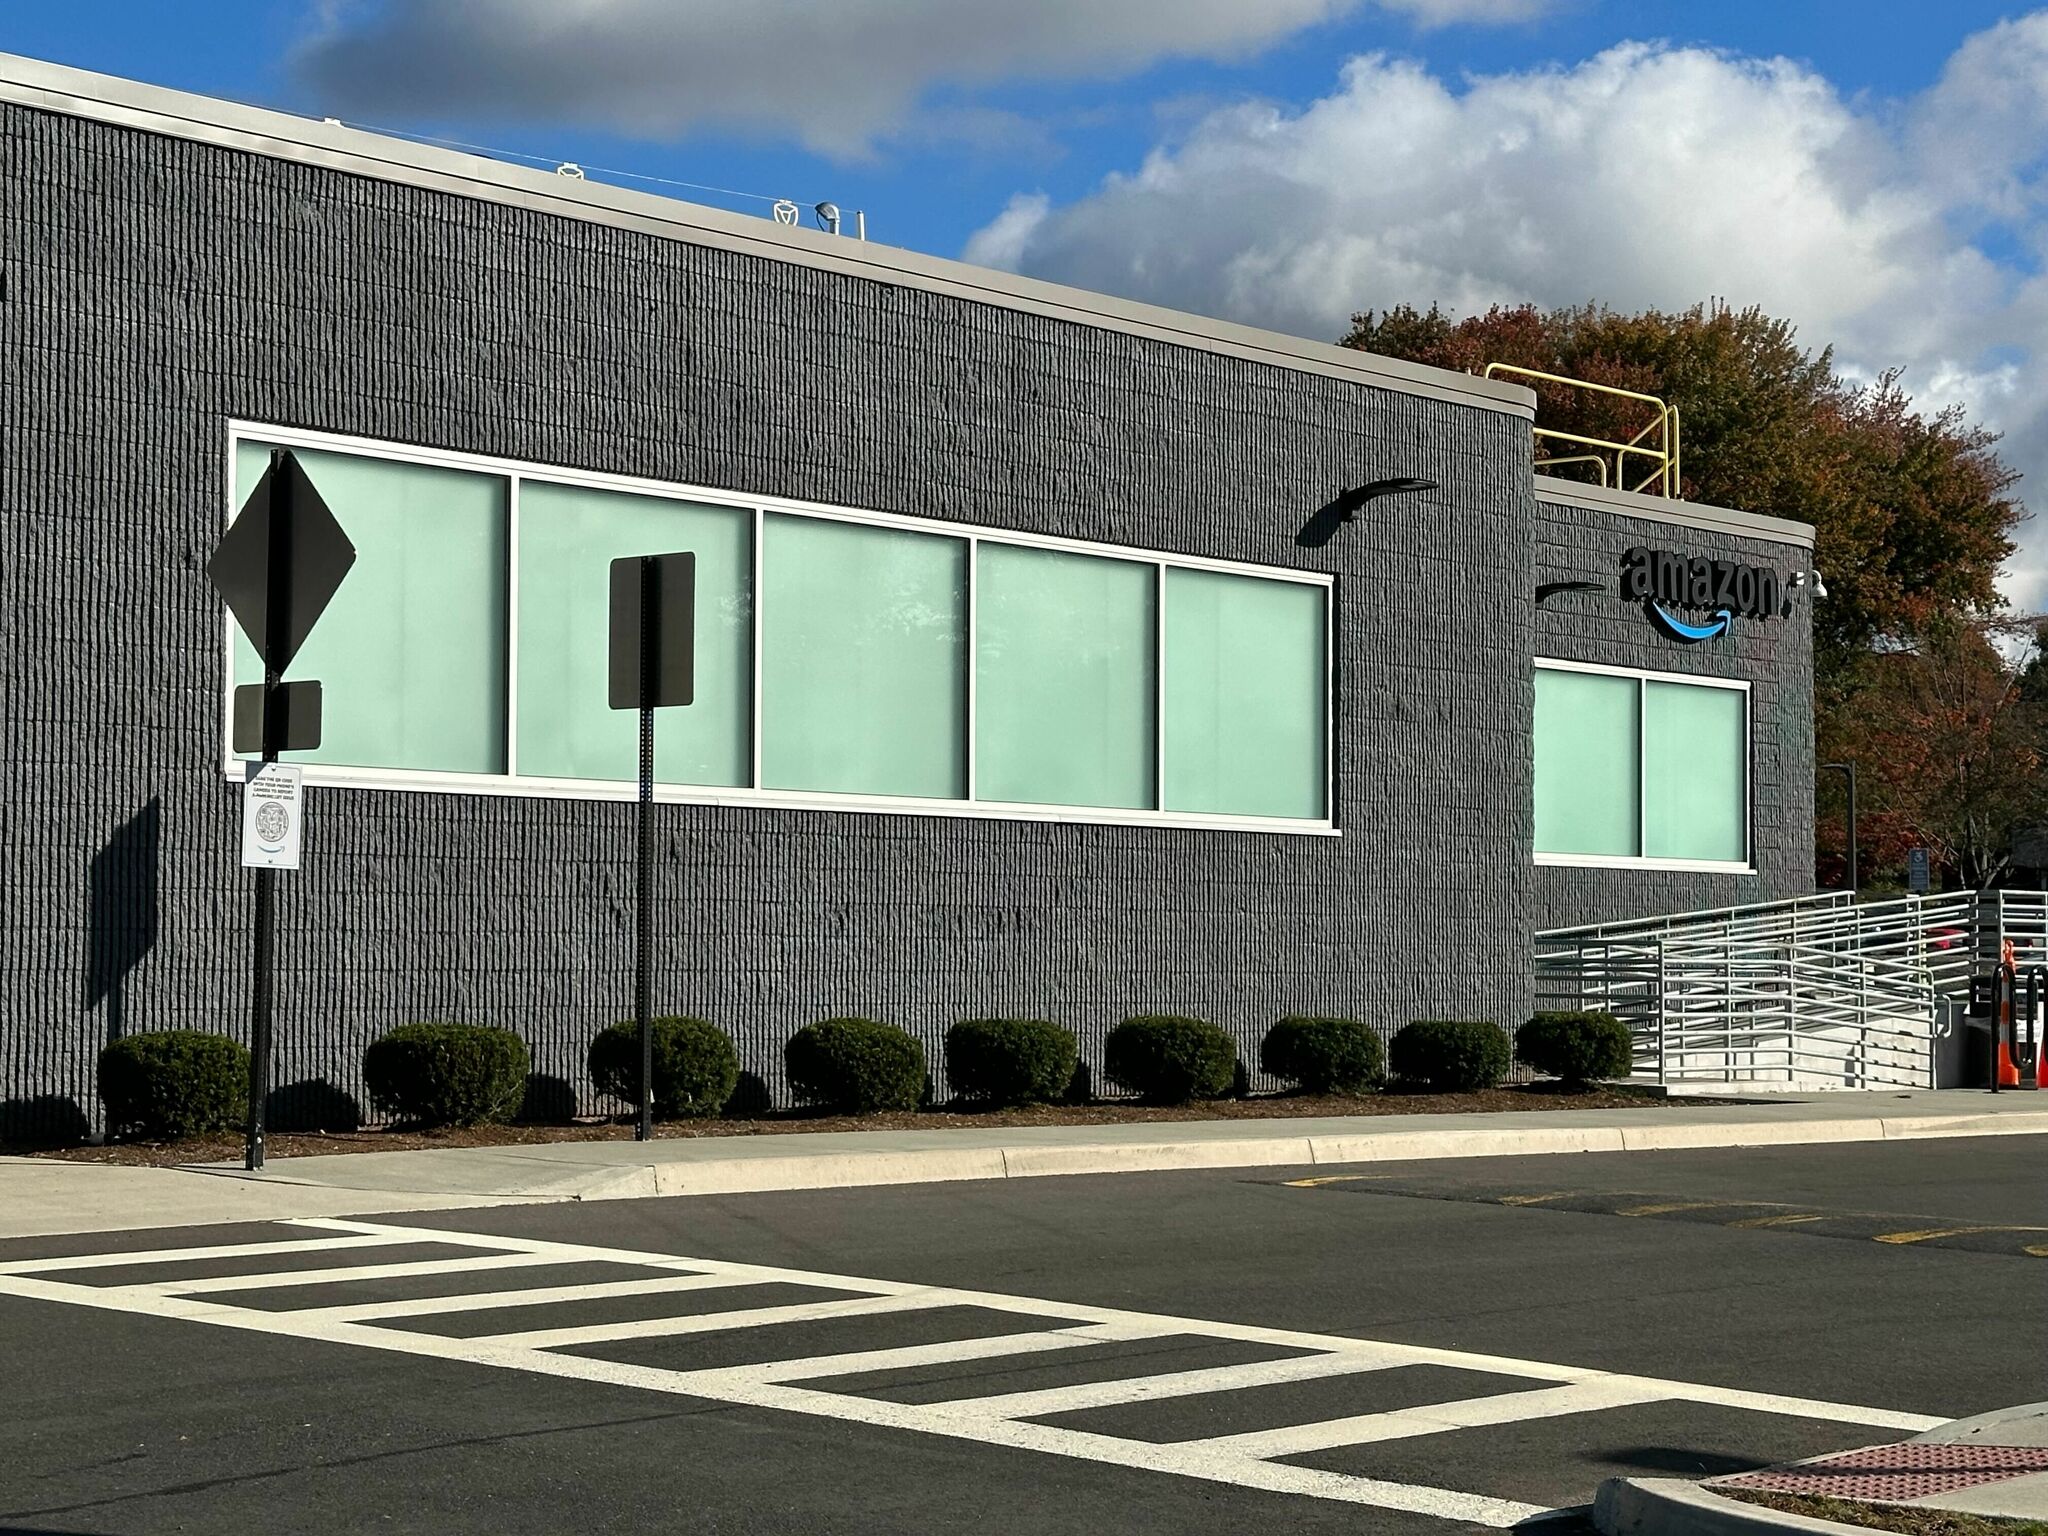 expands its network across CT as warehouse pushback builds